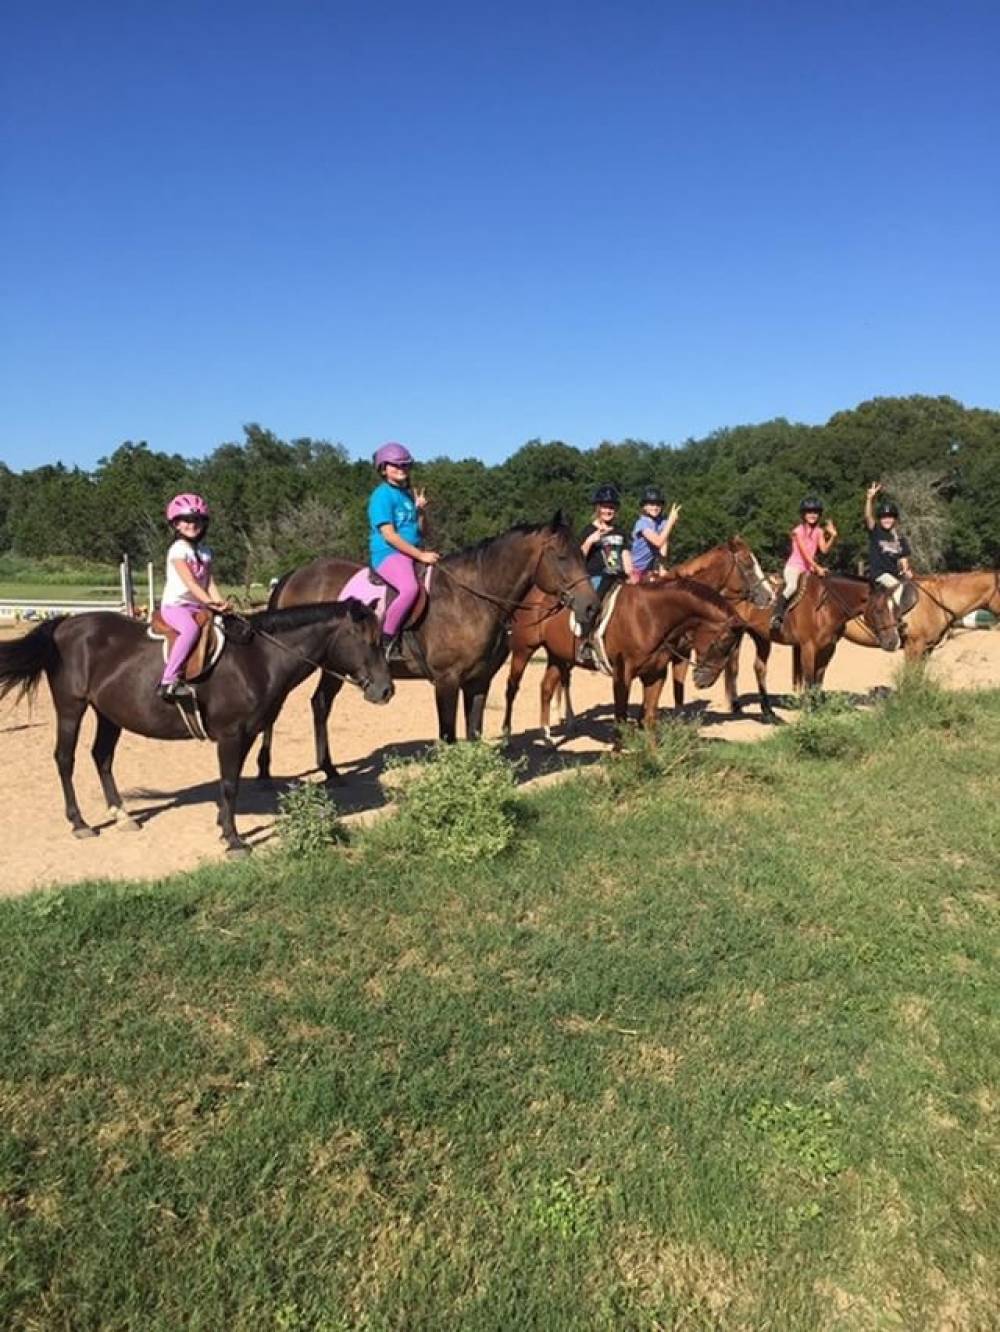 TOP TEXAS BOYS CAMP: Hunters Chase Farms Inc. is a Top Boys Summer Camp located in Wimberley Texas offering many fun and enriching Boys and other camp programs. Hunters Chase Farms Inc. also offers CIT/LIT and/or Teen Leadership Opportunities, too.